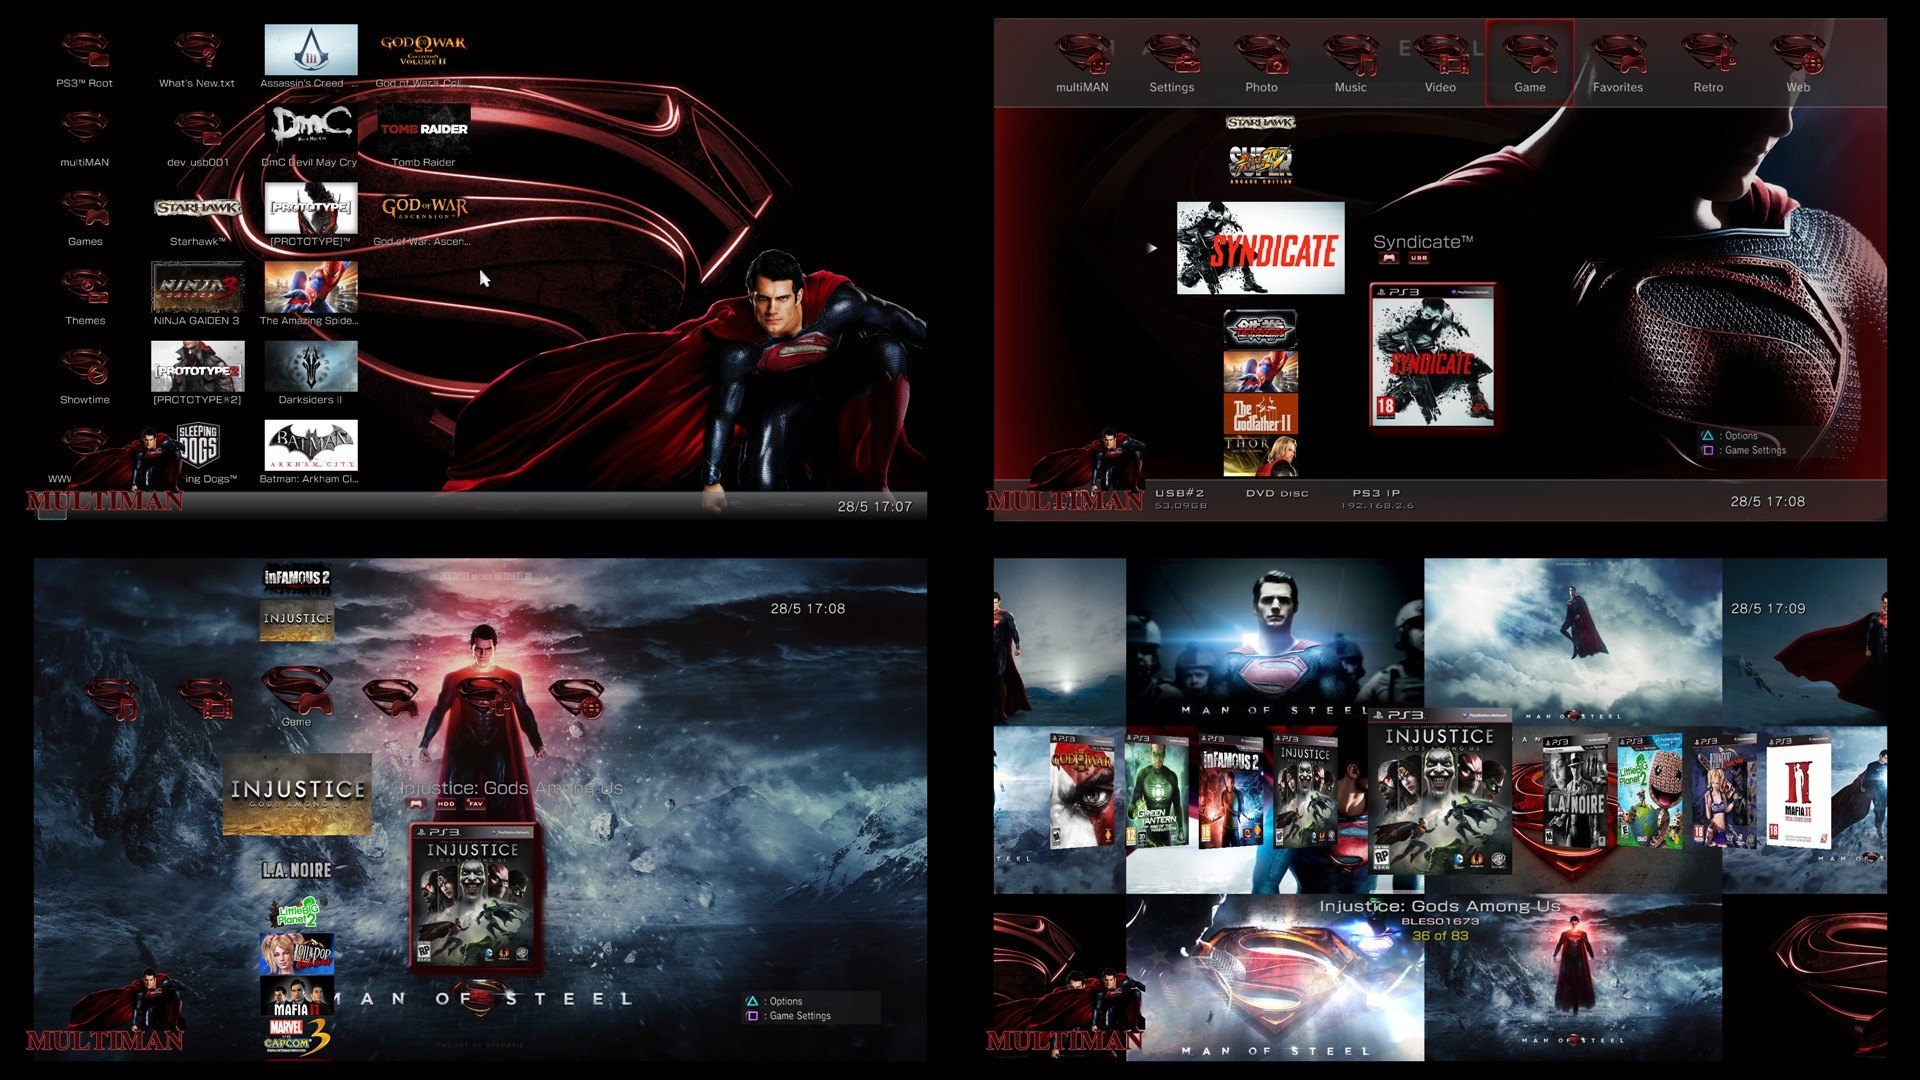 Ps3 themes. Ps3 Themes PLAYSTATION. Темы для ps3. Крутые темы на ps3. Multiman ps3.